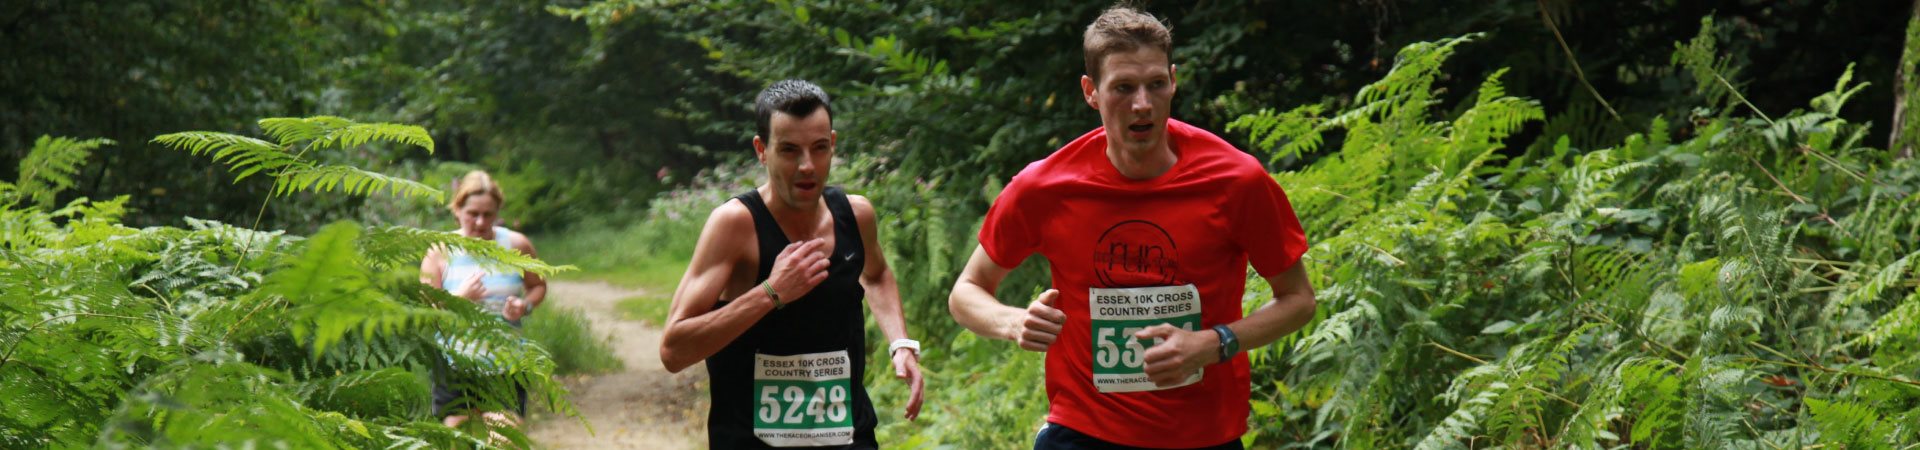 The Essex Cross Country 10K Series 2021